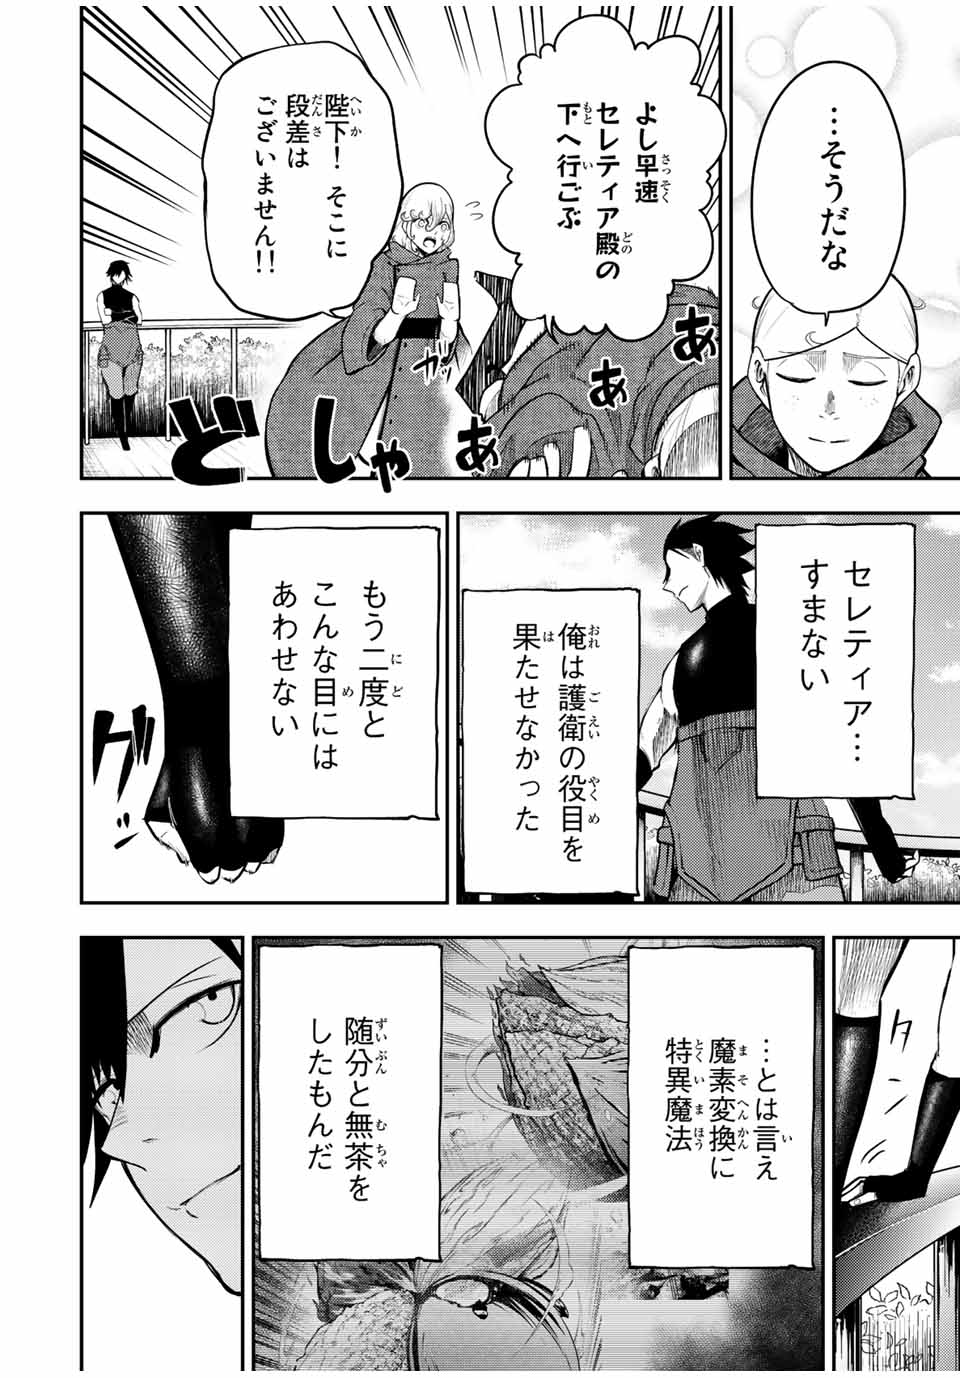 the strongest former prince-; 奴隷転生 ～その奴隷、最強の元王子につき～ 第65話 - Page 18